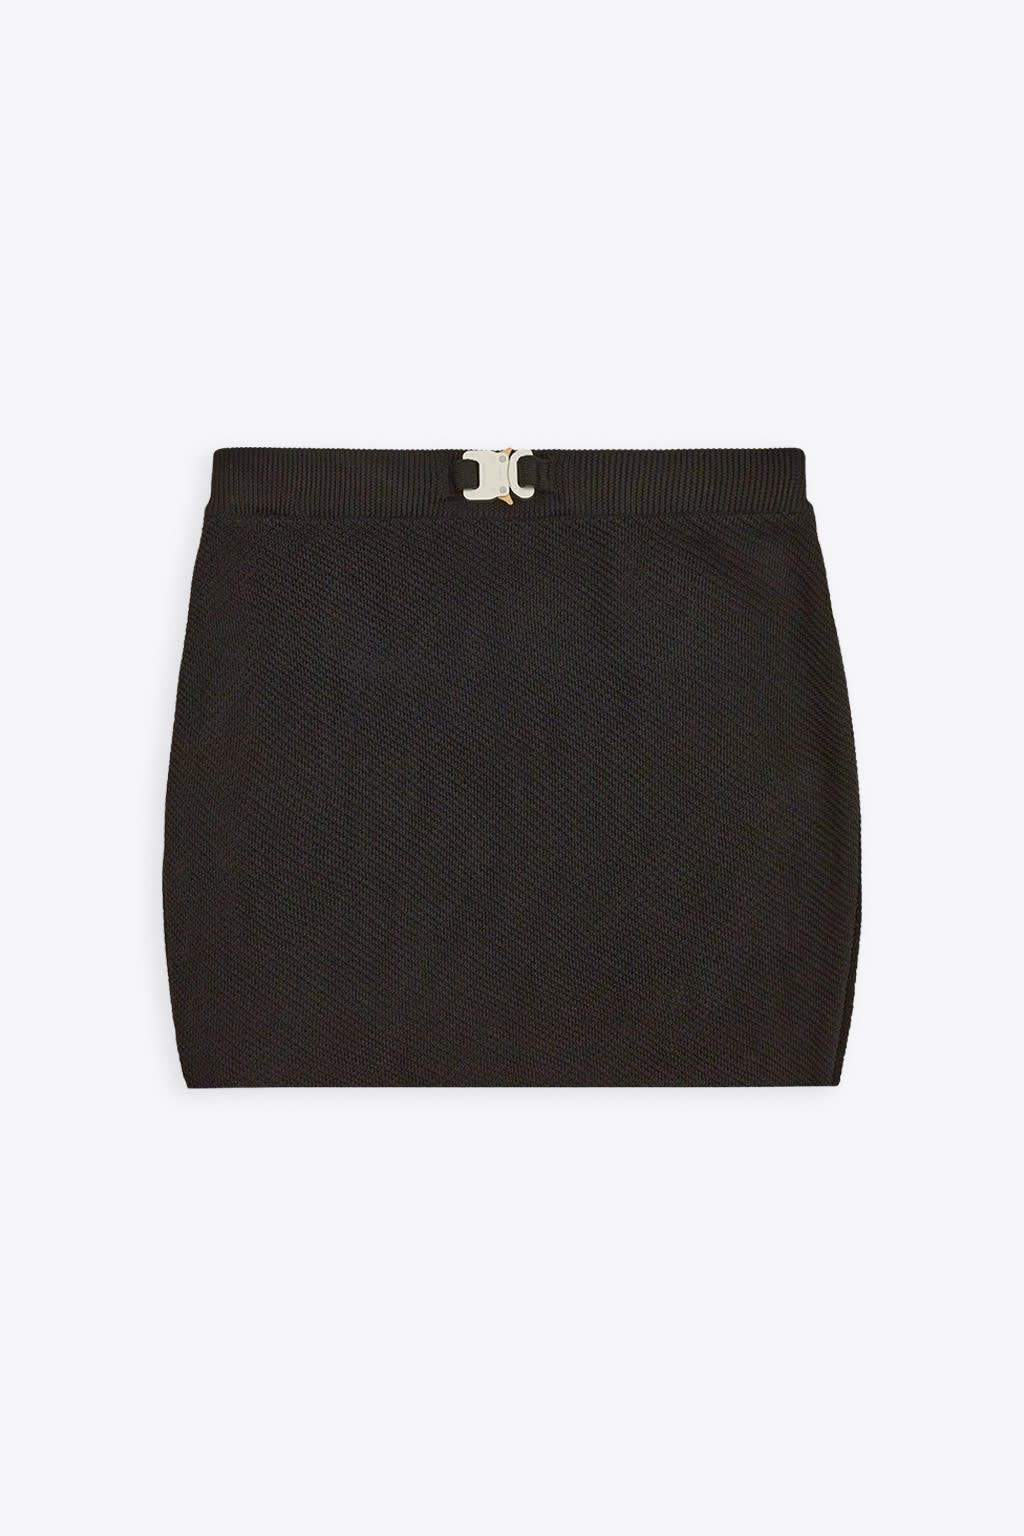 1017 ALYX 9SM Knit Skirt Black knitted mini-skirt with buckle - Knit skirt